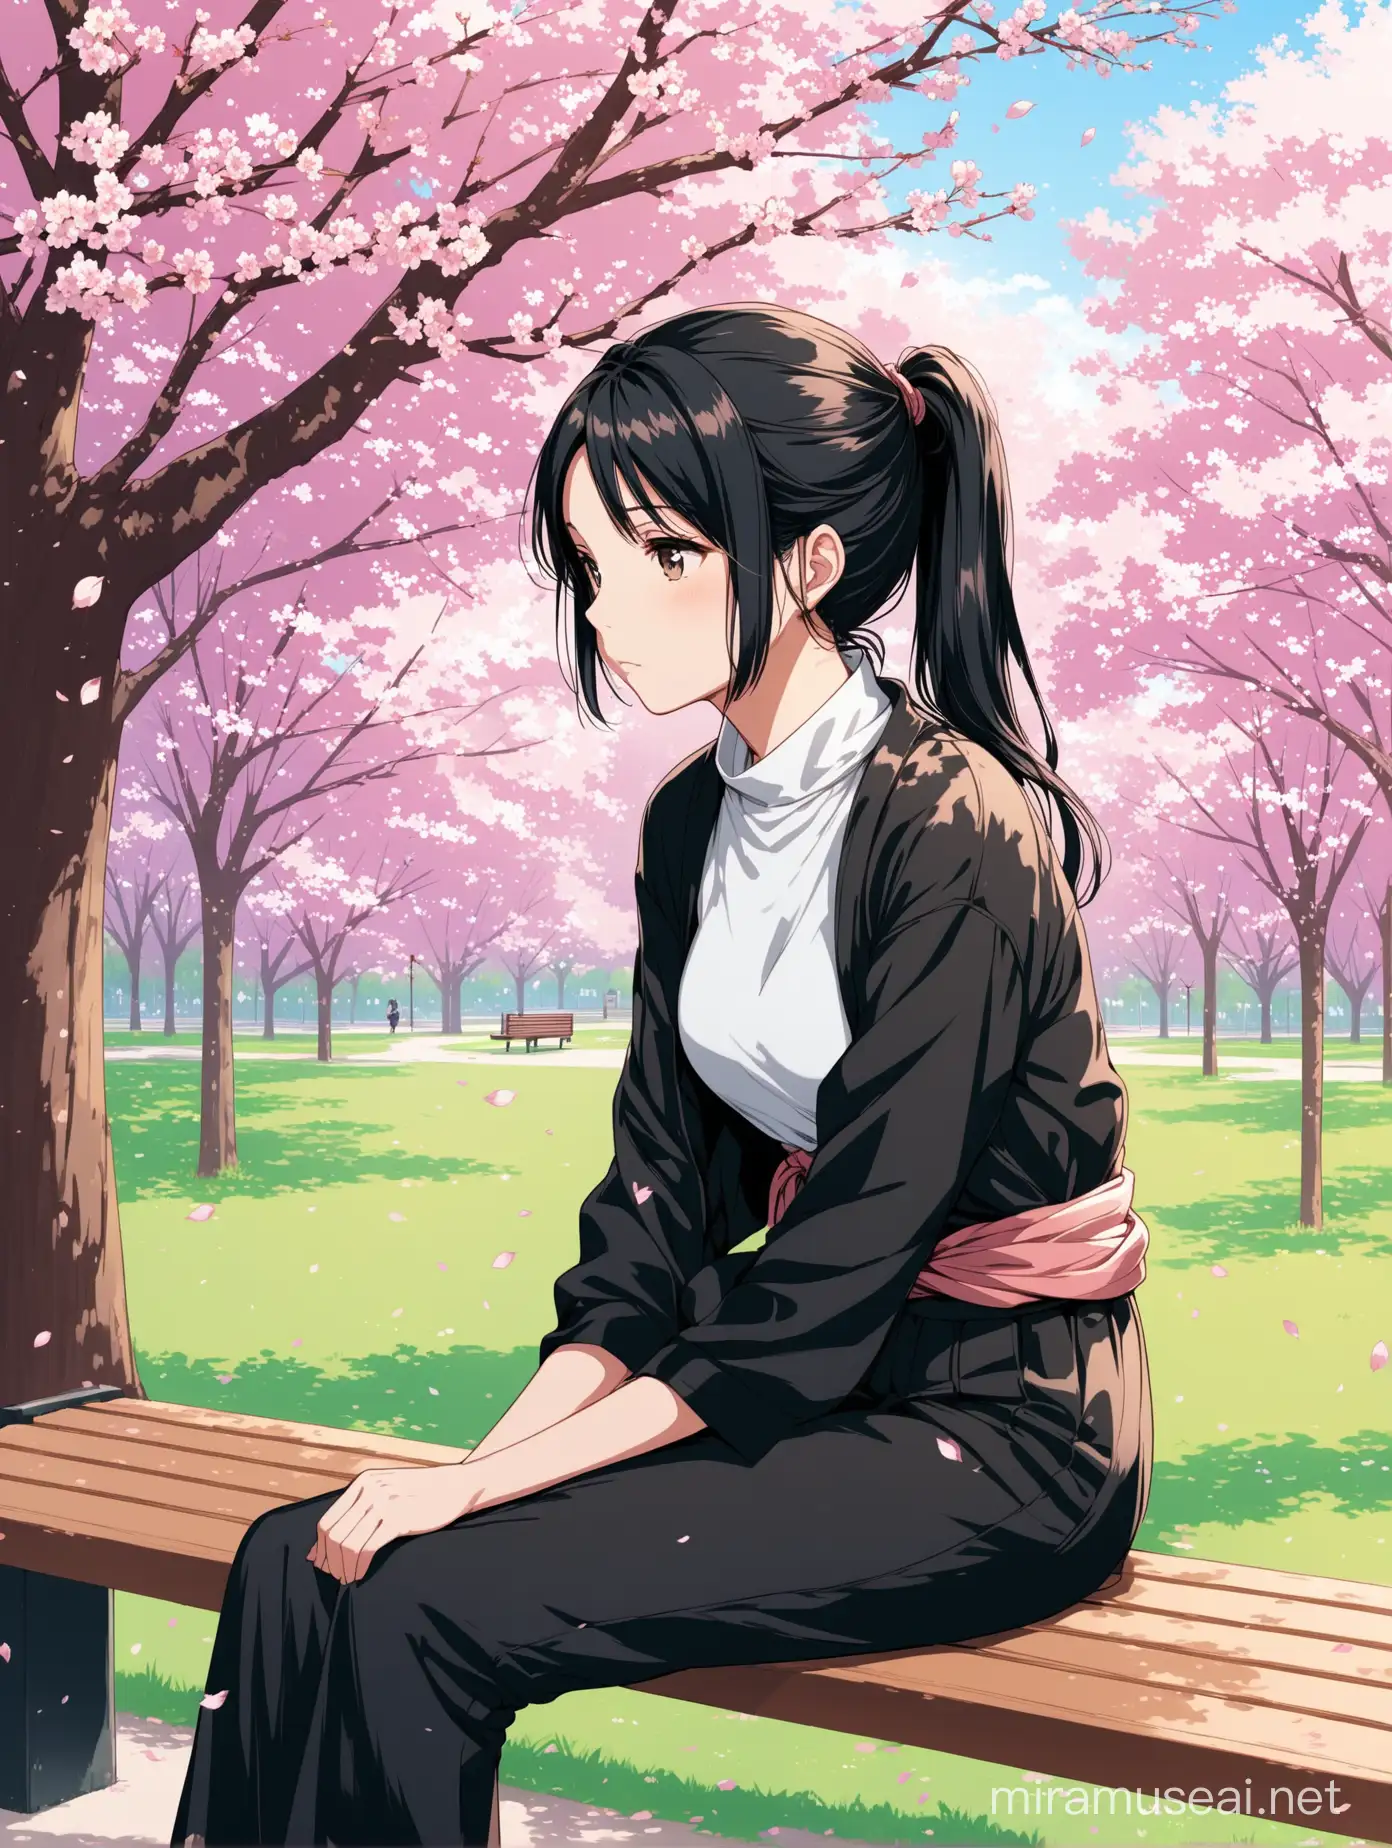 A woman with anime-style black hair tied up in a ponytail sits alone on a bench in a park, lost in thought as cherry blossoms fall around her.